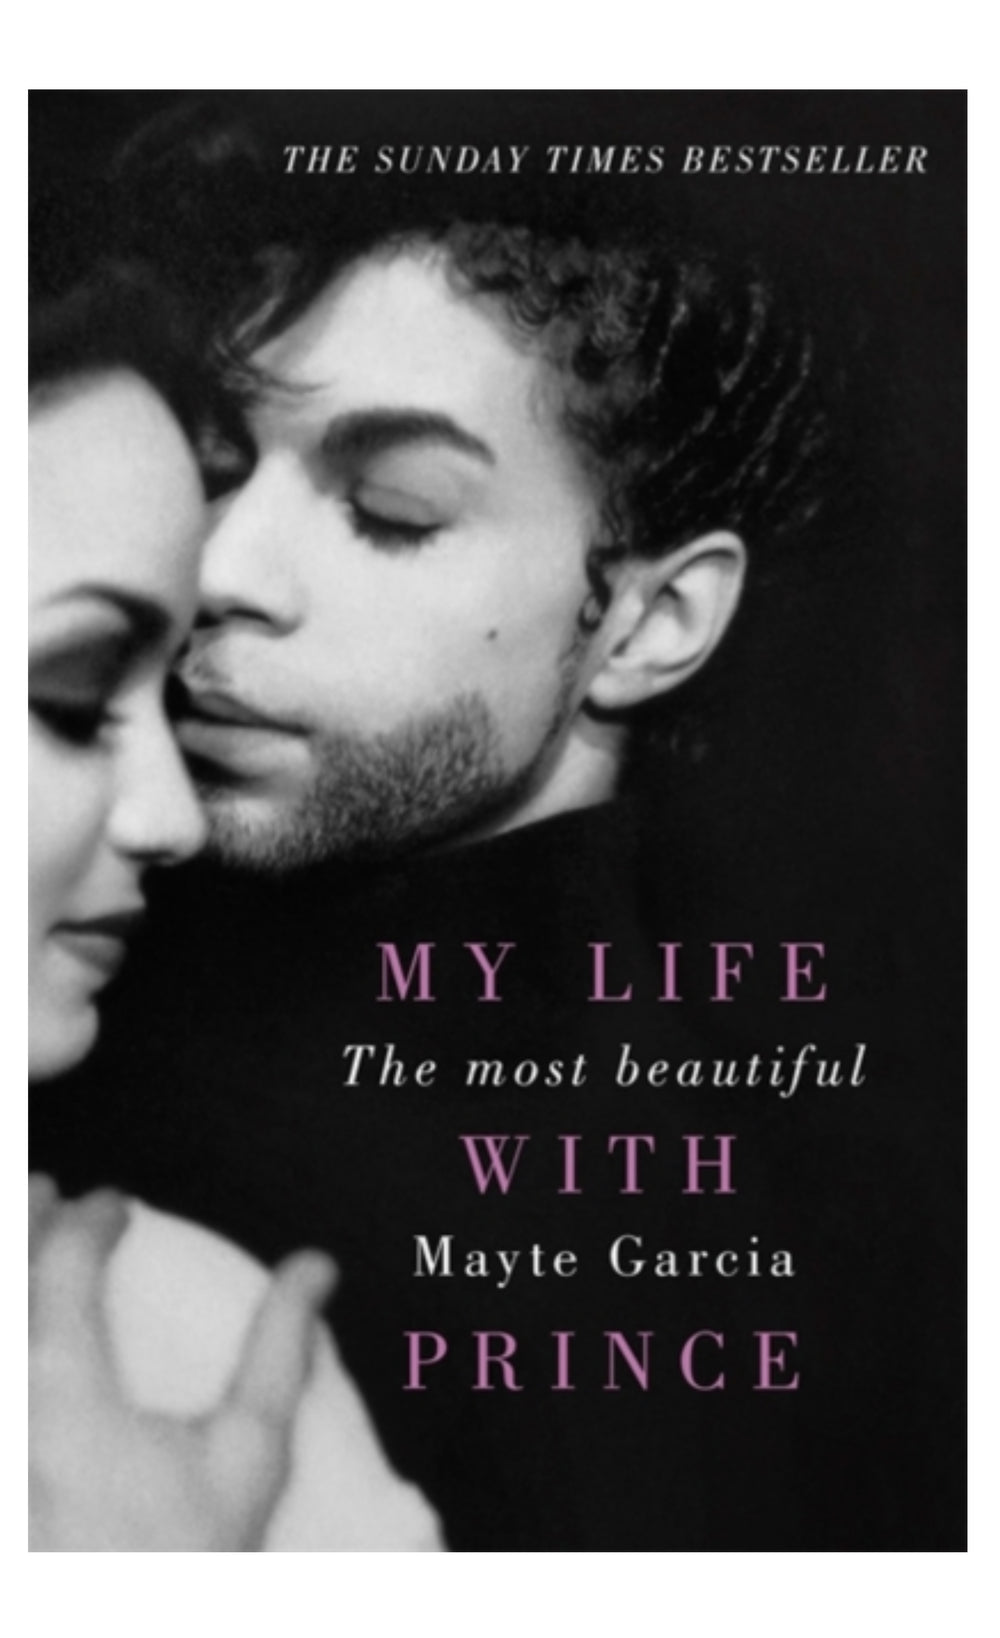 Prince – The Most Beautiful : My Life With Prince by Mayte Garcia Book Softbacked: NEW